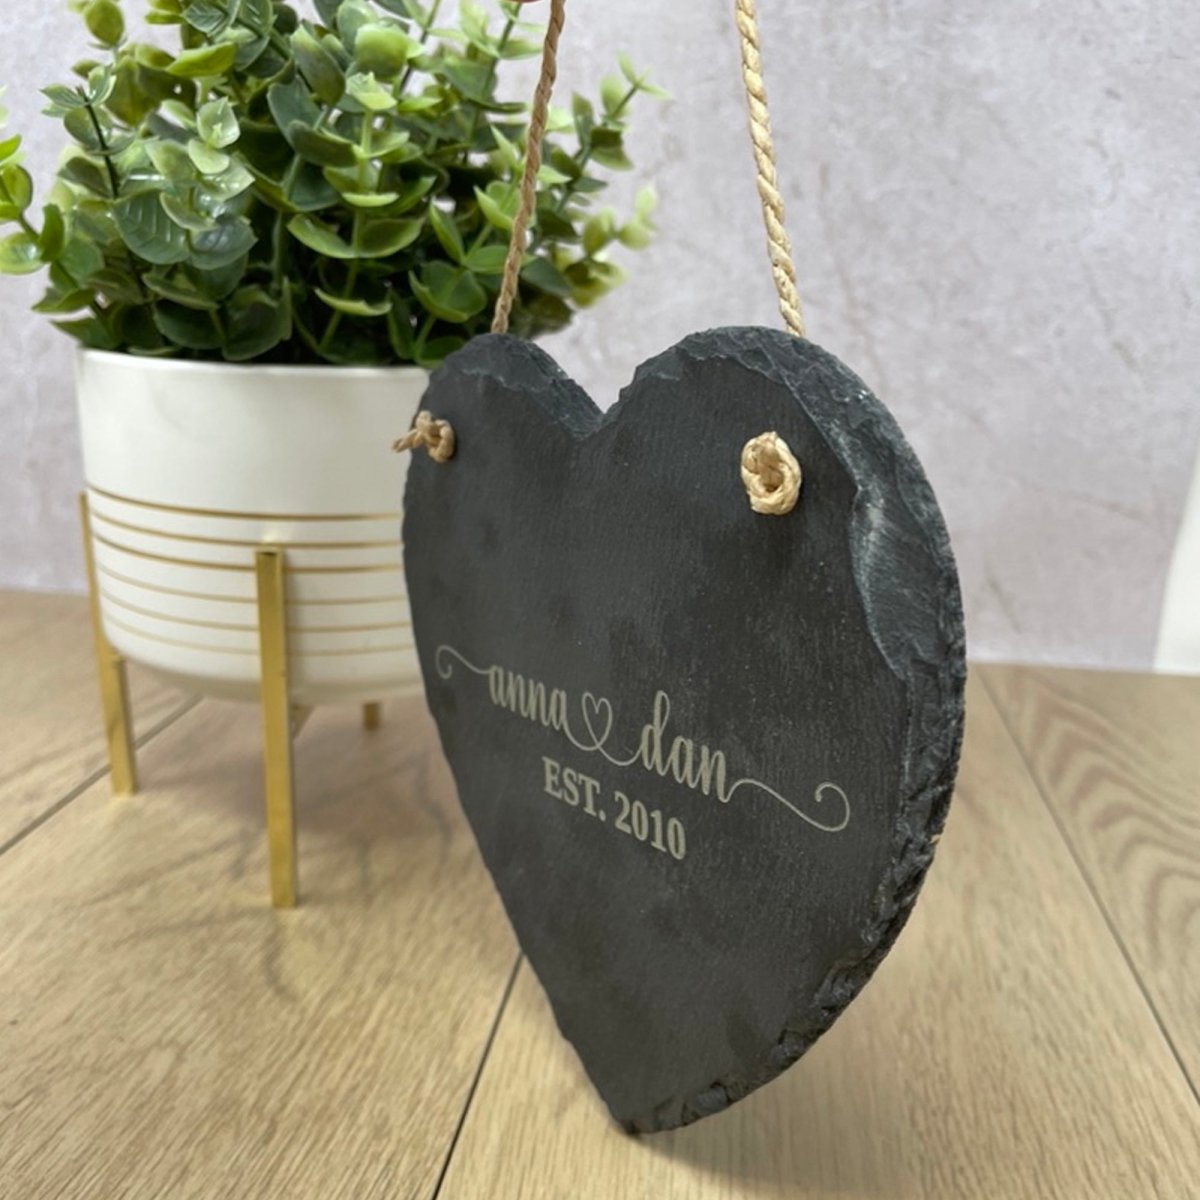 Personalised Slate Plaque Heart Shaped Plaque Engraved Valentines Gift 15x15cm Personalised   Accessories Gifts UK